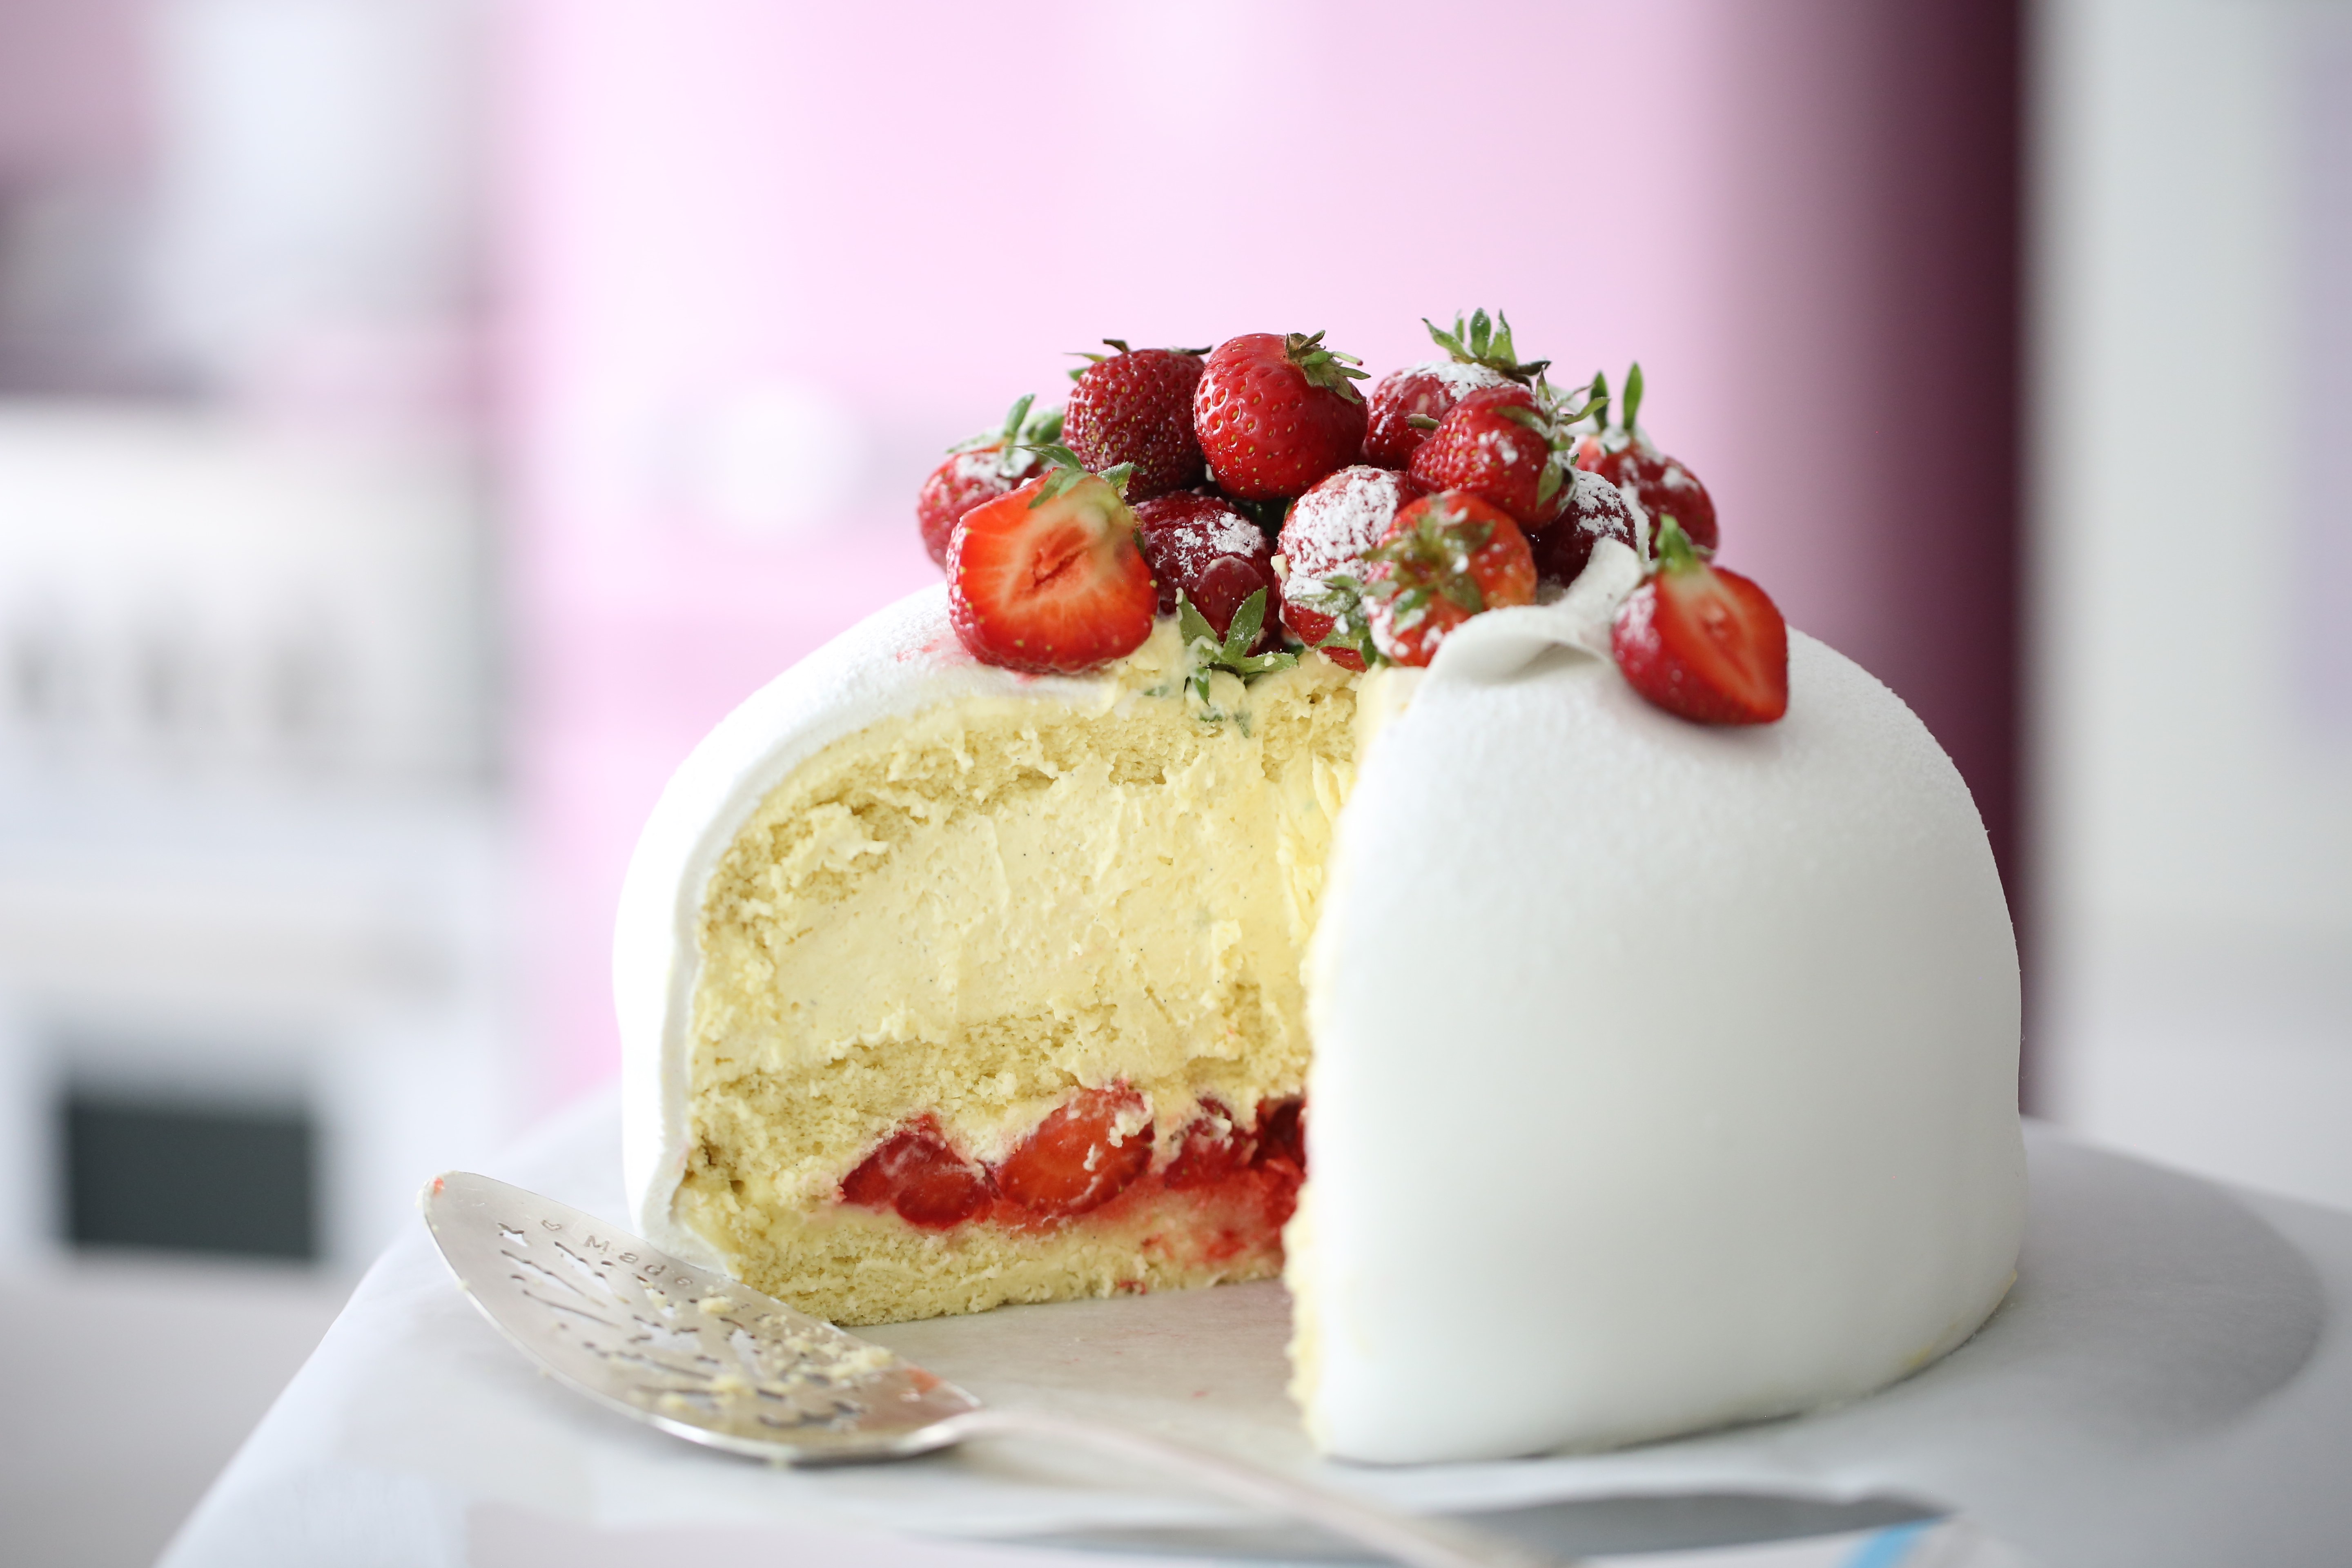 Chateraise Singapore - Tantalizing fresh cream and strawberries sandwiched  in vanilla sponge cake, dressed with strawberry powder and piped with  strawberry fresh cream to perfection! The Strawberry Princess Cake is a  must-try